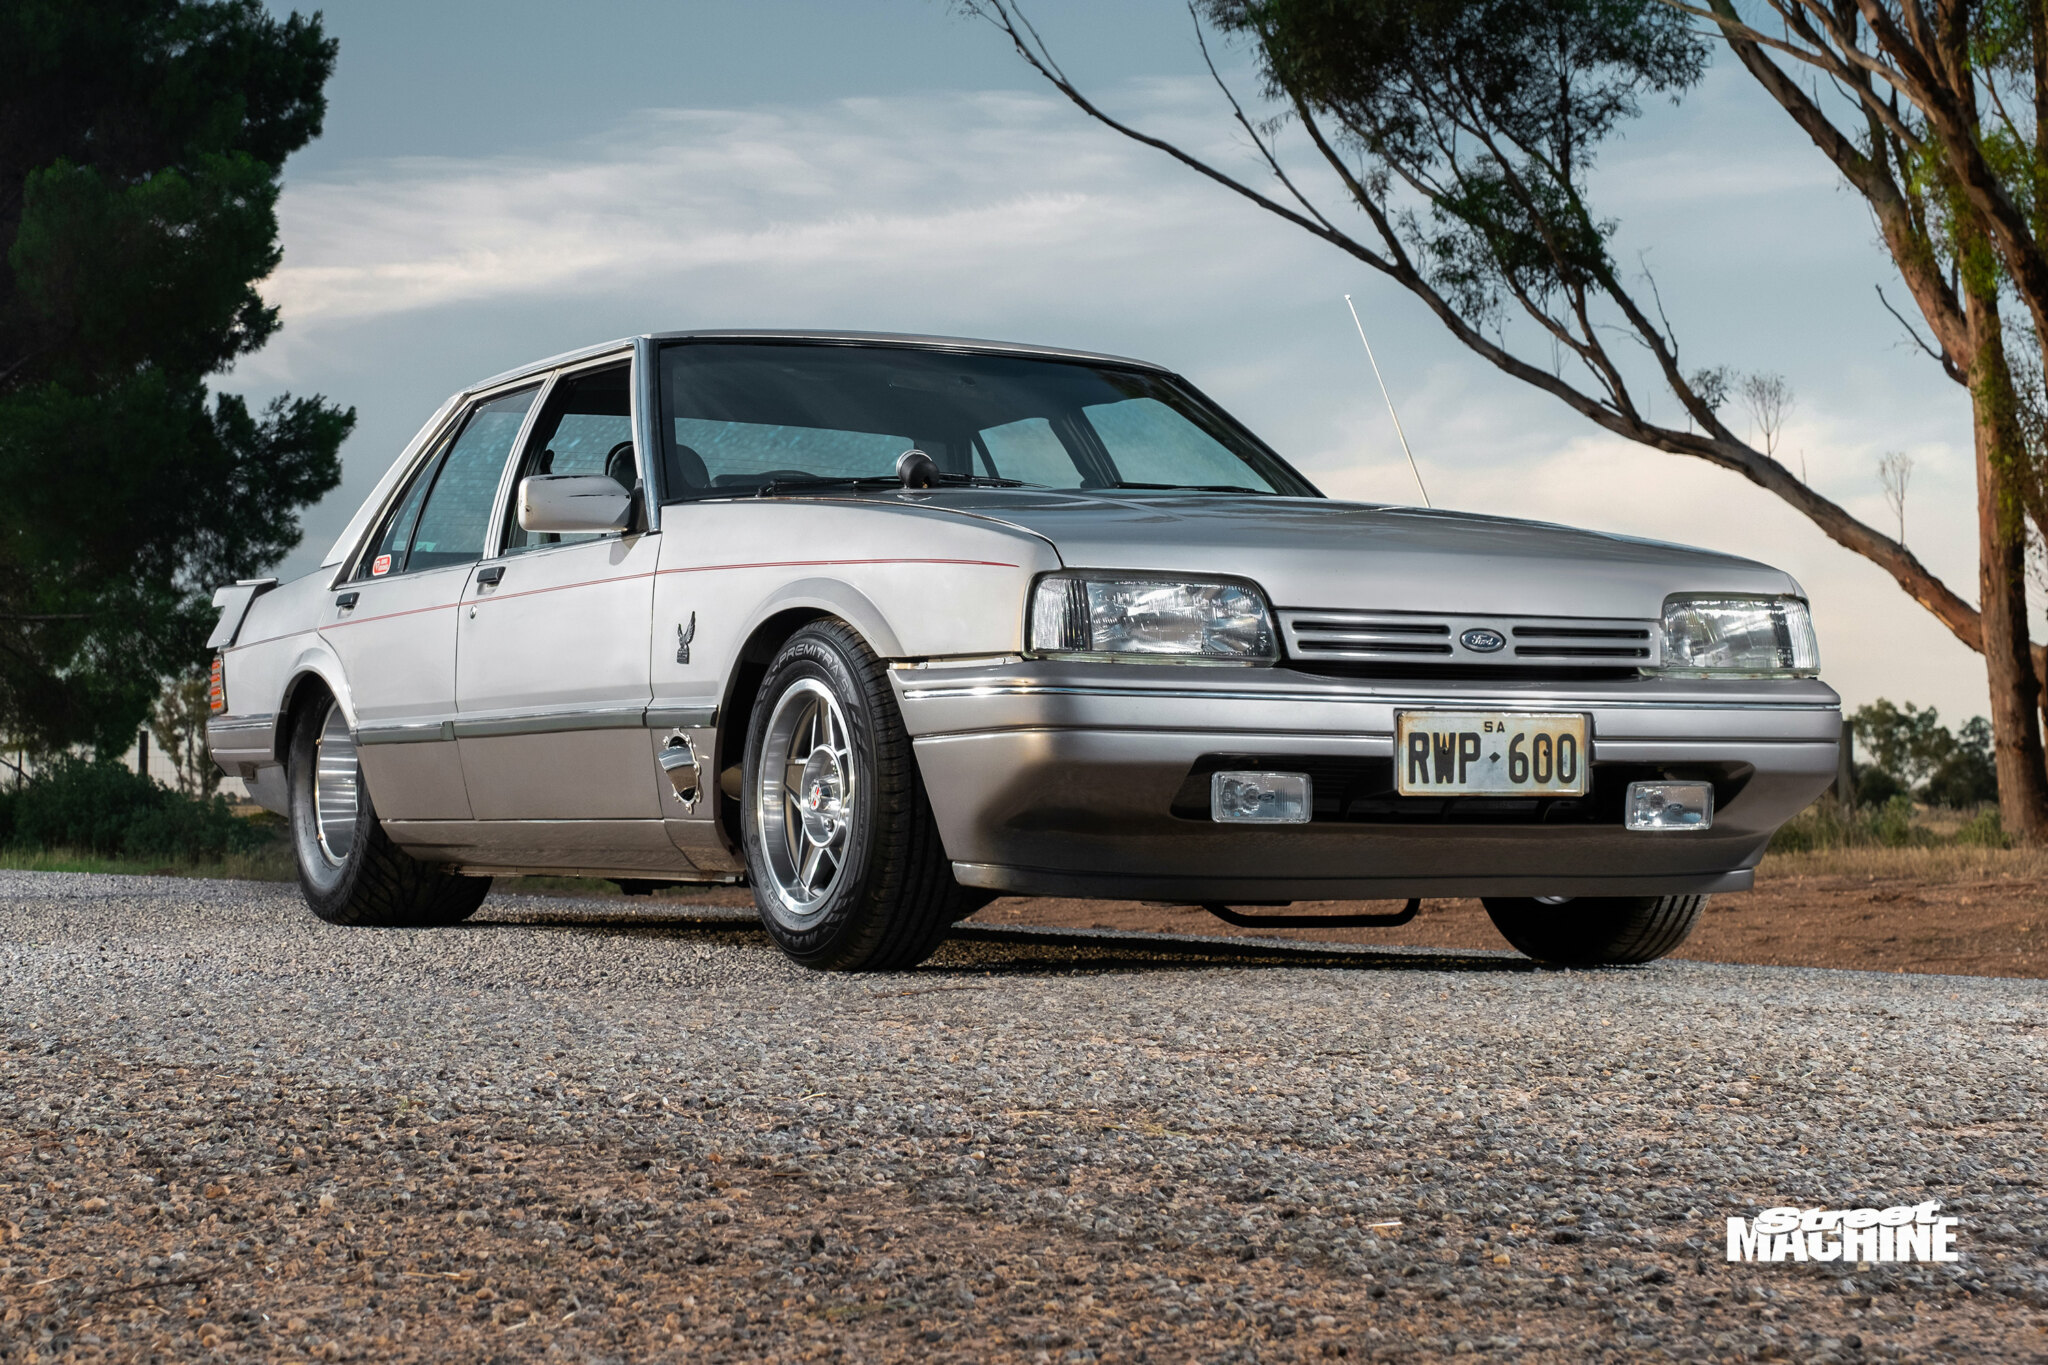 Barra-swapped XF 25th Anniversary Ford Falcon